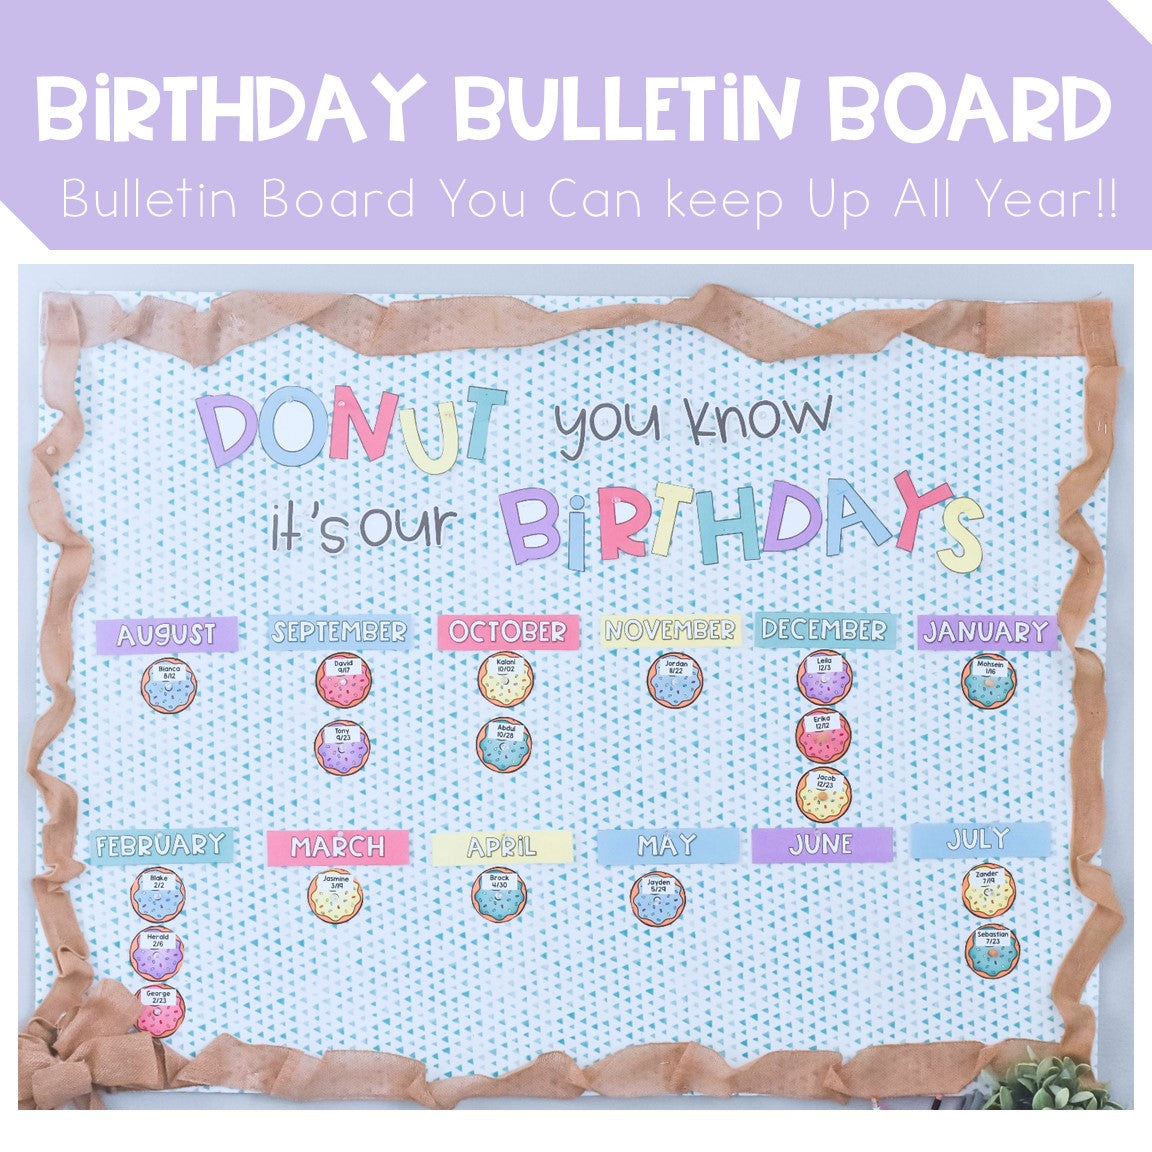 Birthday Bulletin Board: Donut You Know It's Our Birthday Board and Tags